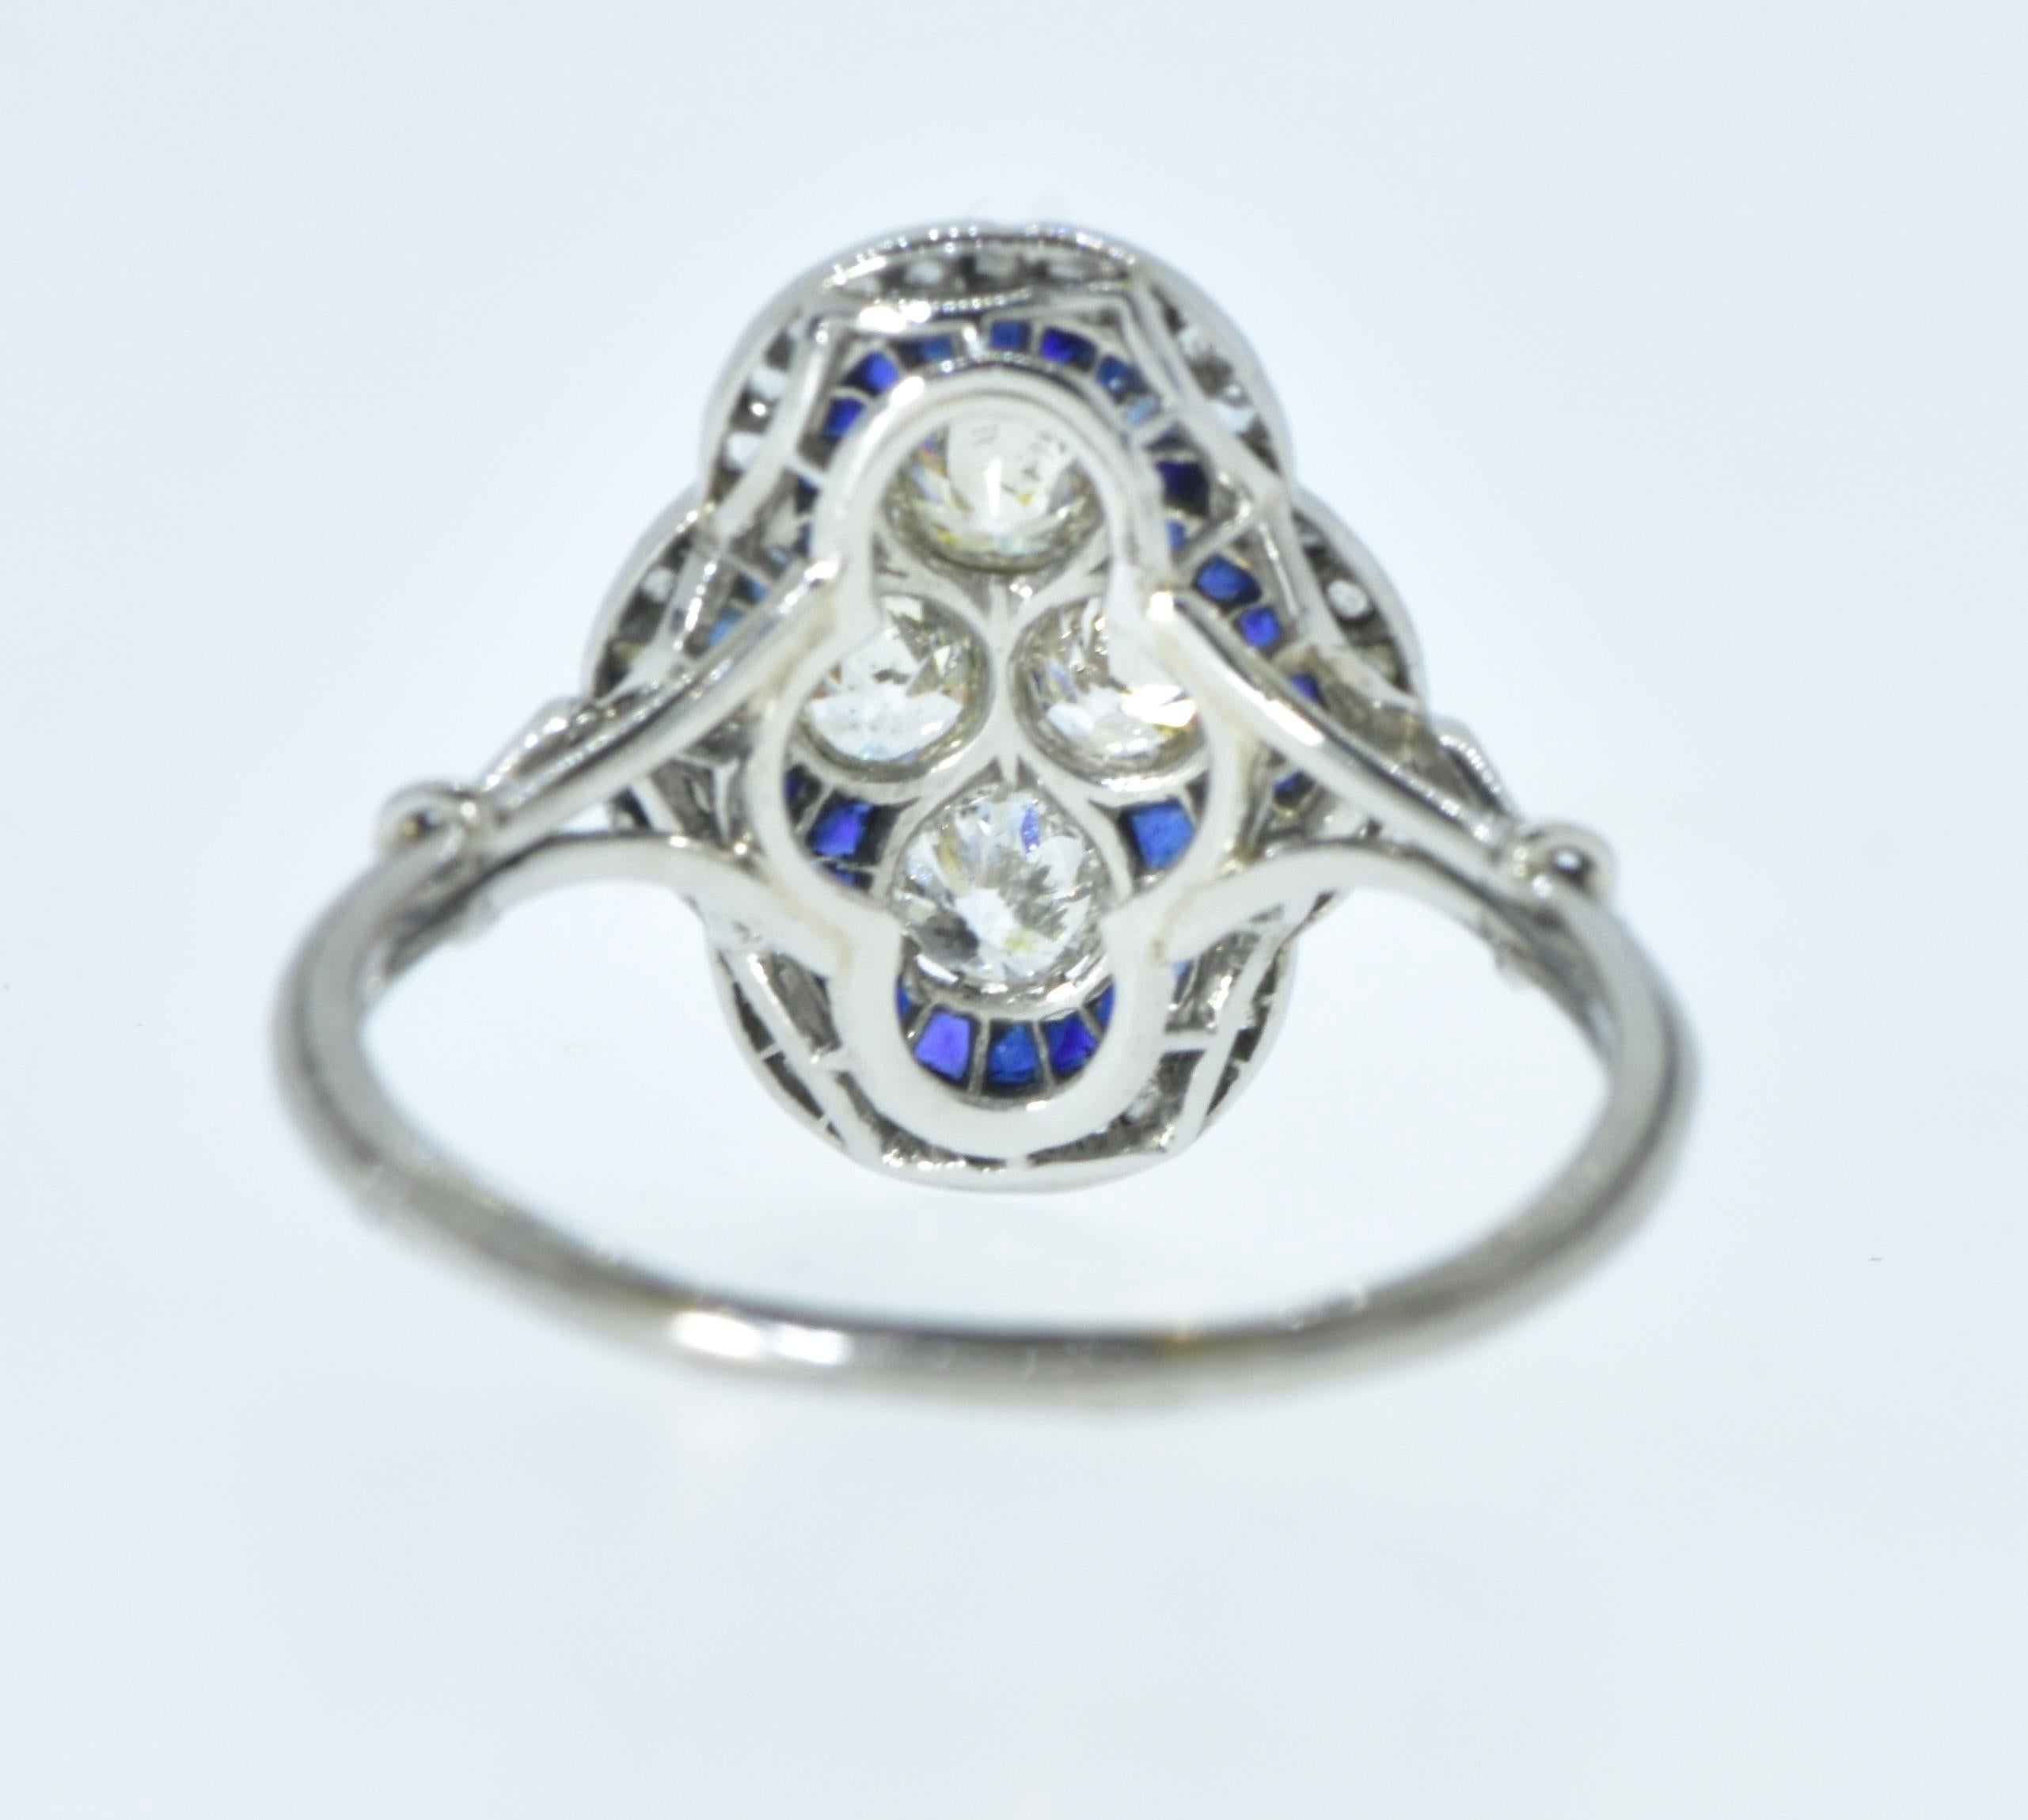 Antique Edwardian Diamond and Sapphire Ring in excellent condition, circa 1915 For Sale 4